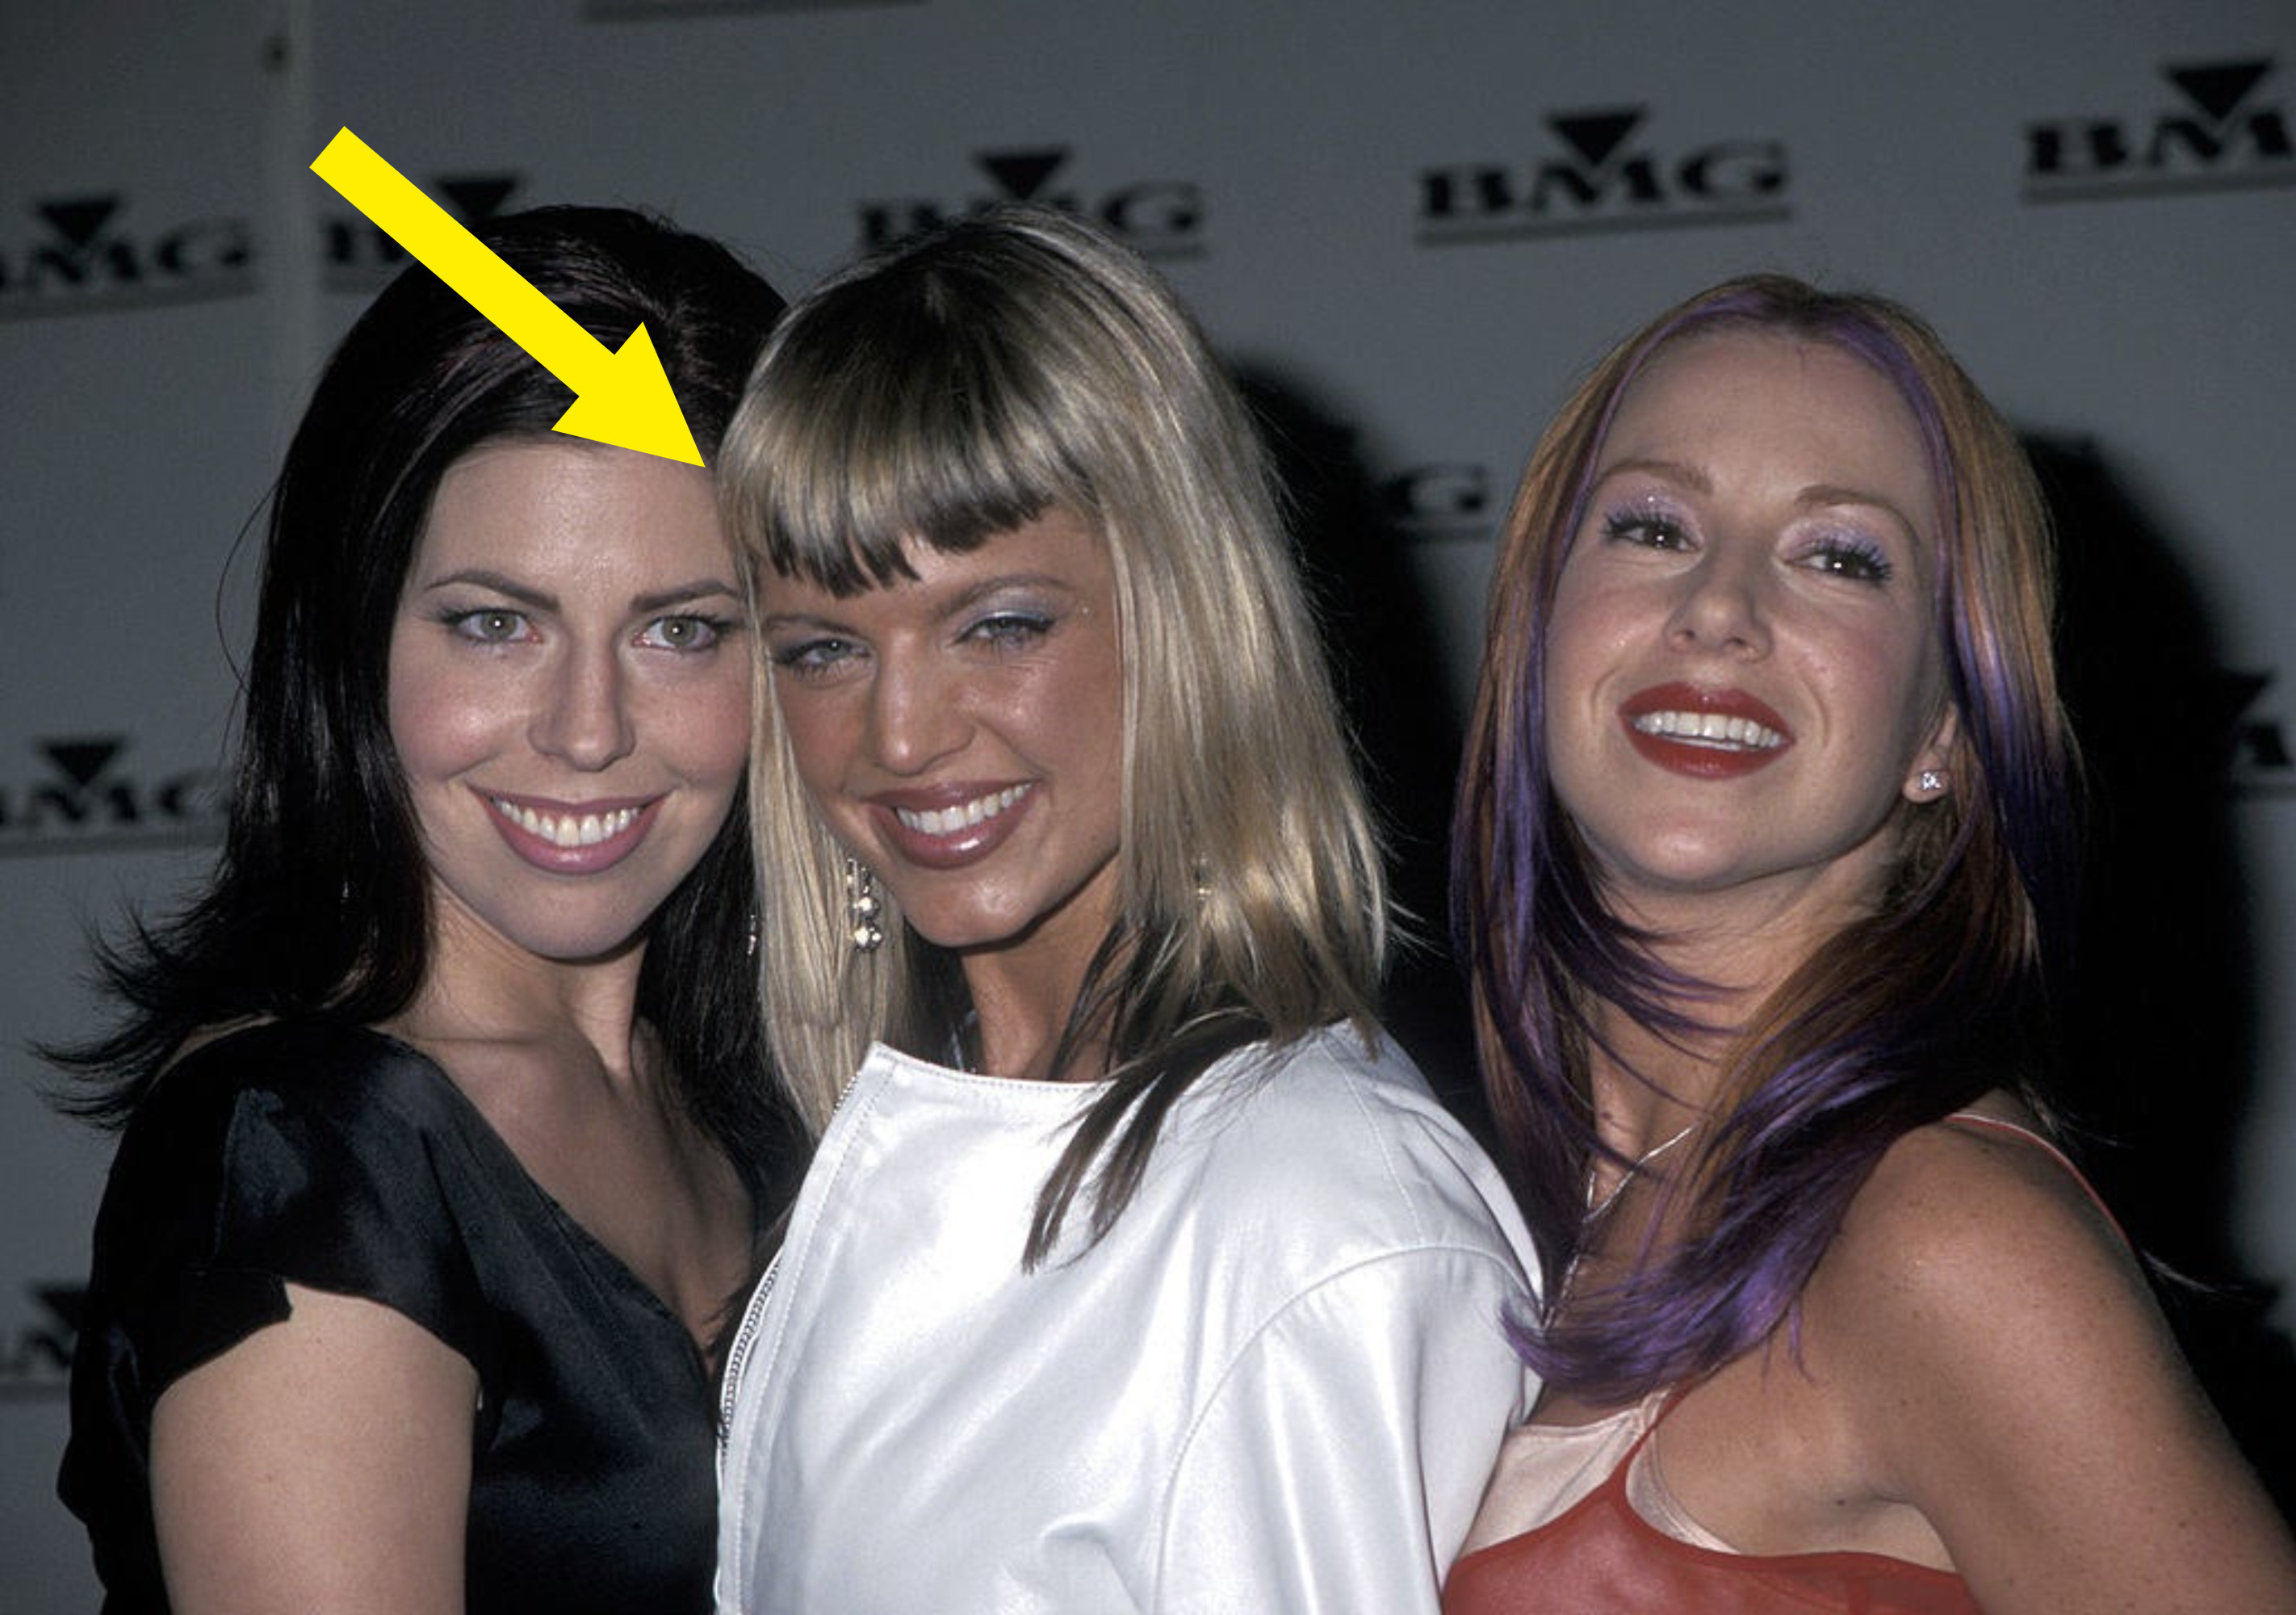 Fergie with a blonde bob and in a white jacket between two other girls at a red carpet 